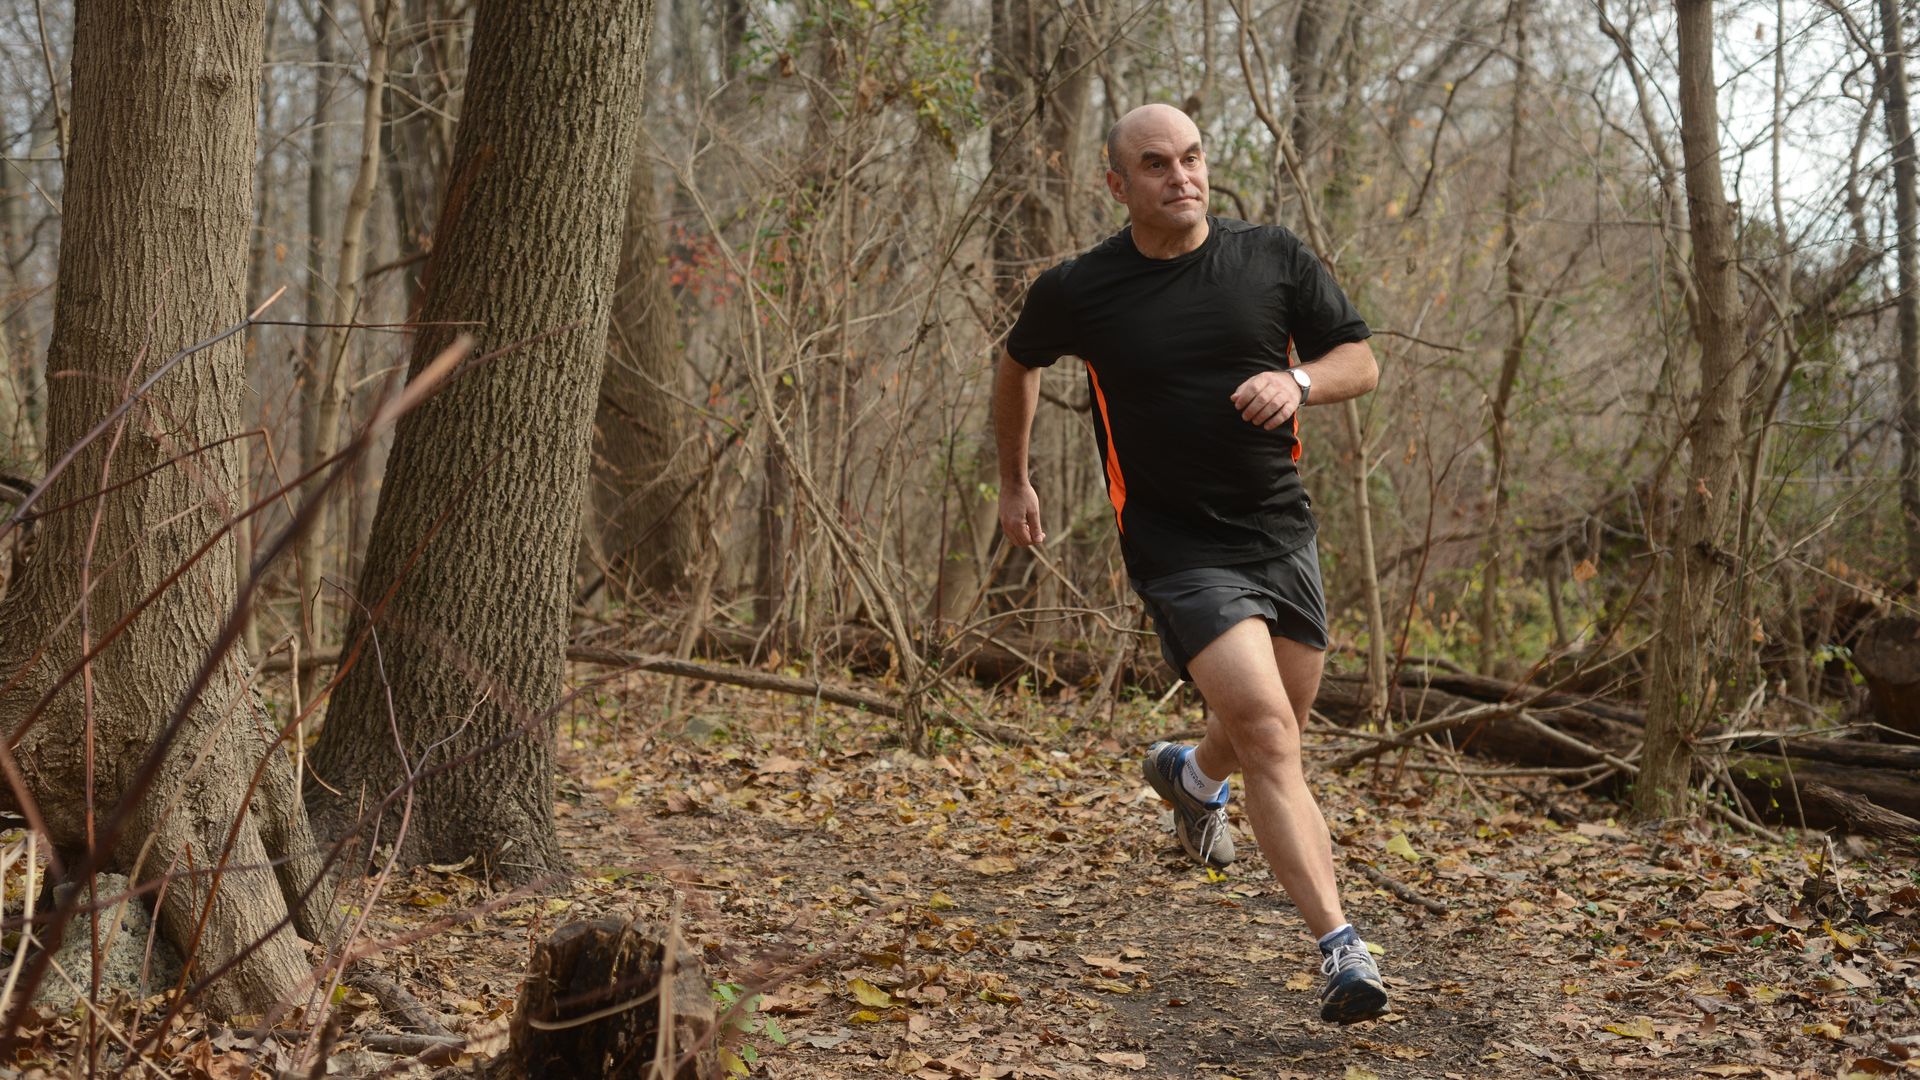 A man in black shorts and a black t-shirt runs around the bend of a trail in a forested park. The trees in the background have lost their leaves.